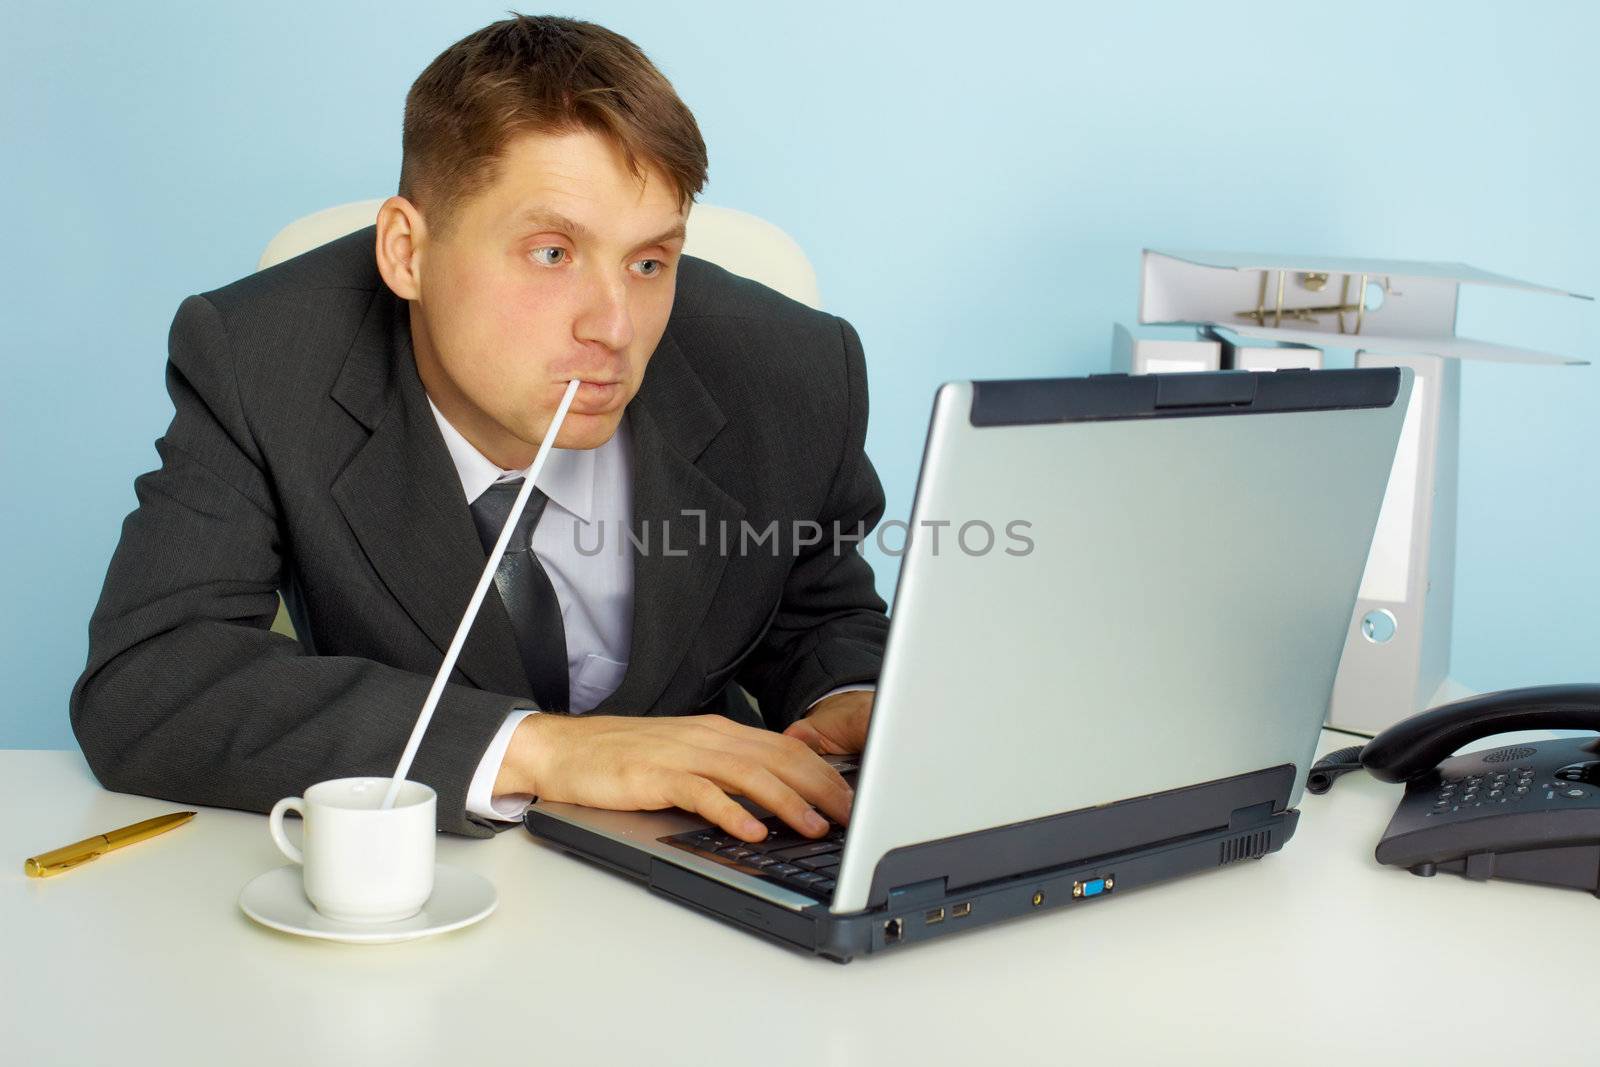 a very busy man working with laptop computer and drinks coffee through a straw
